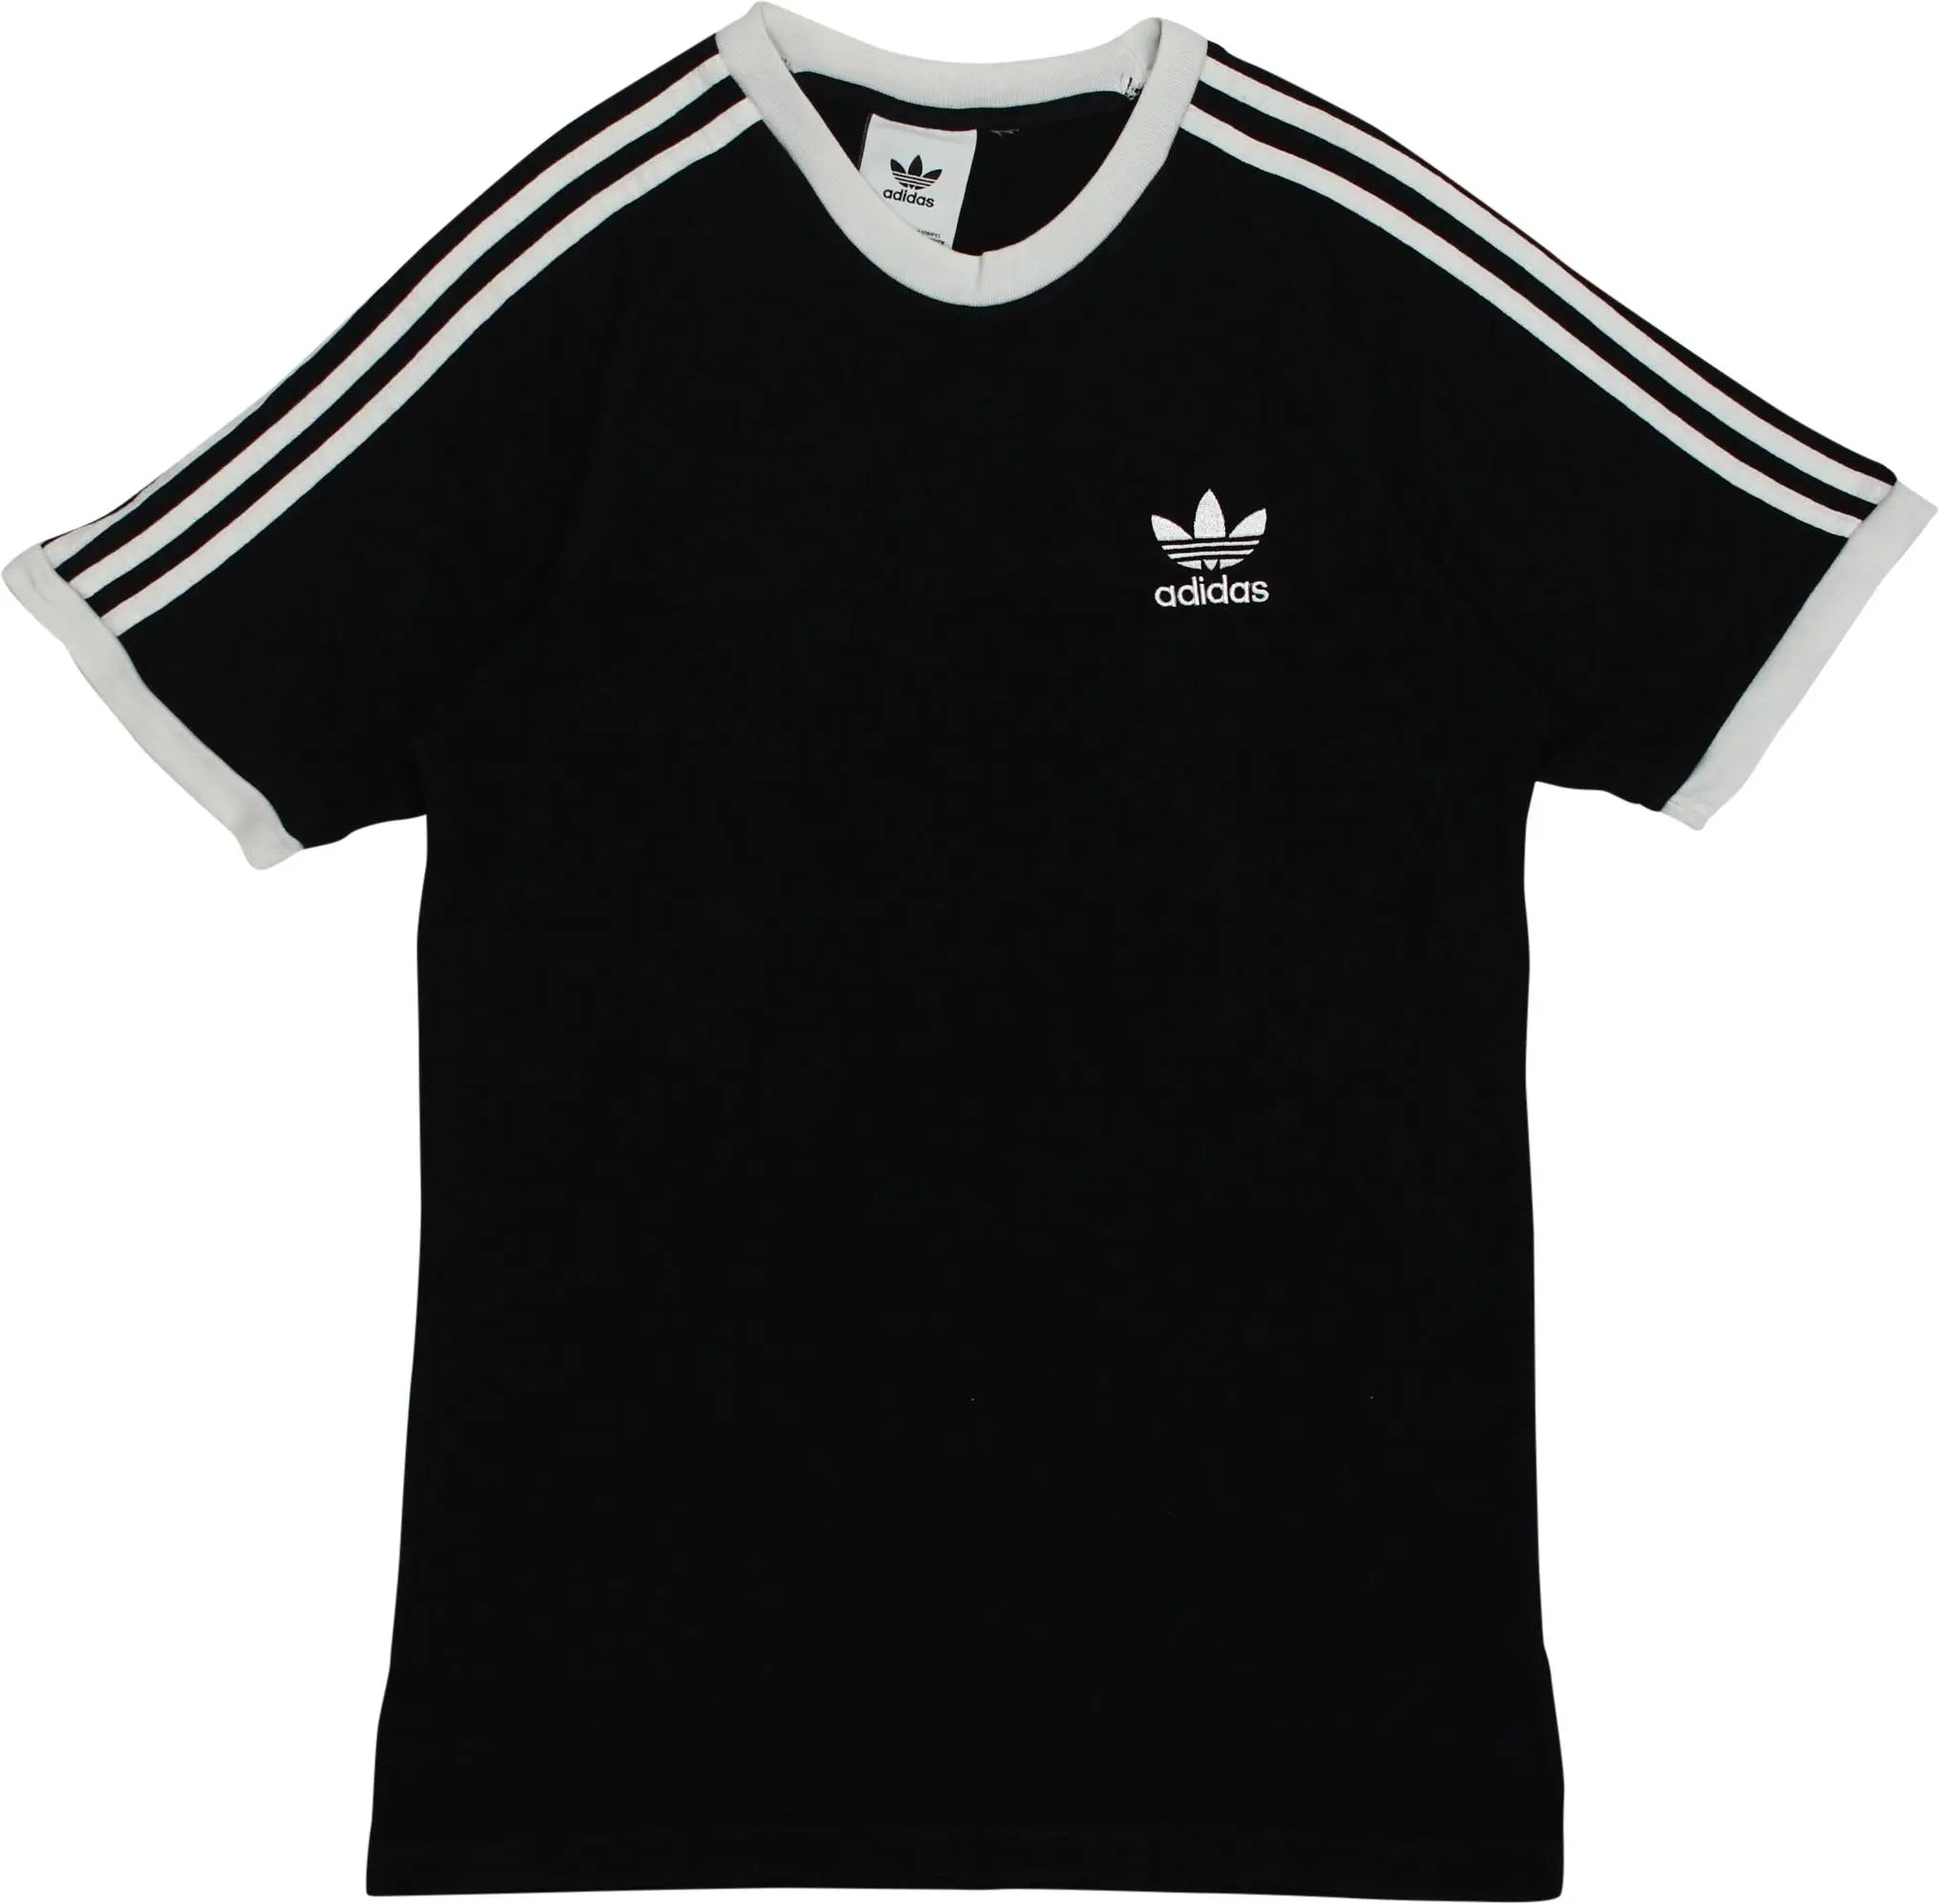 Adidas - Black 3-Stripes T-shirt by Adidas- ThriftTale.com - Vintage and second handclothing